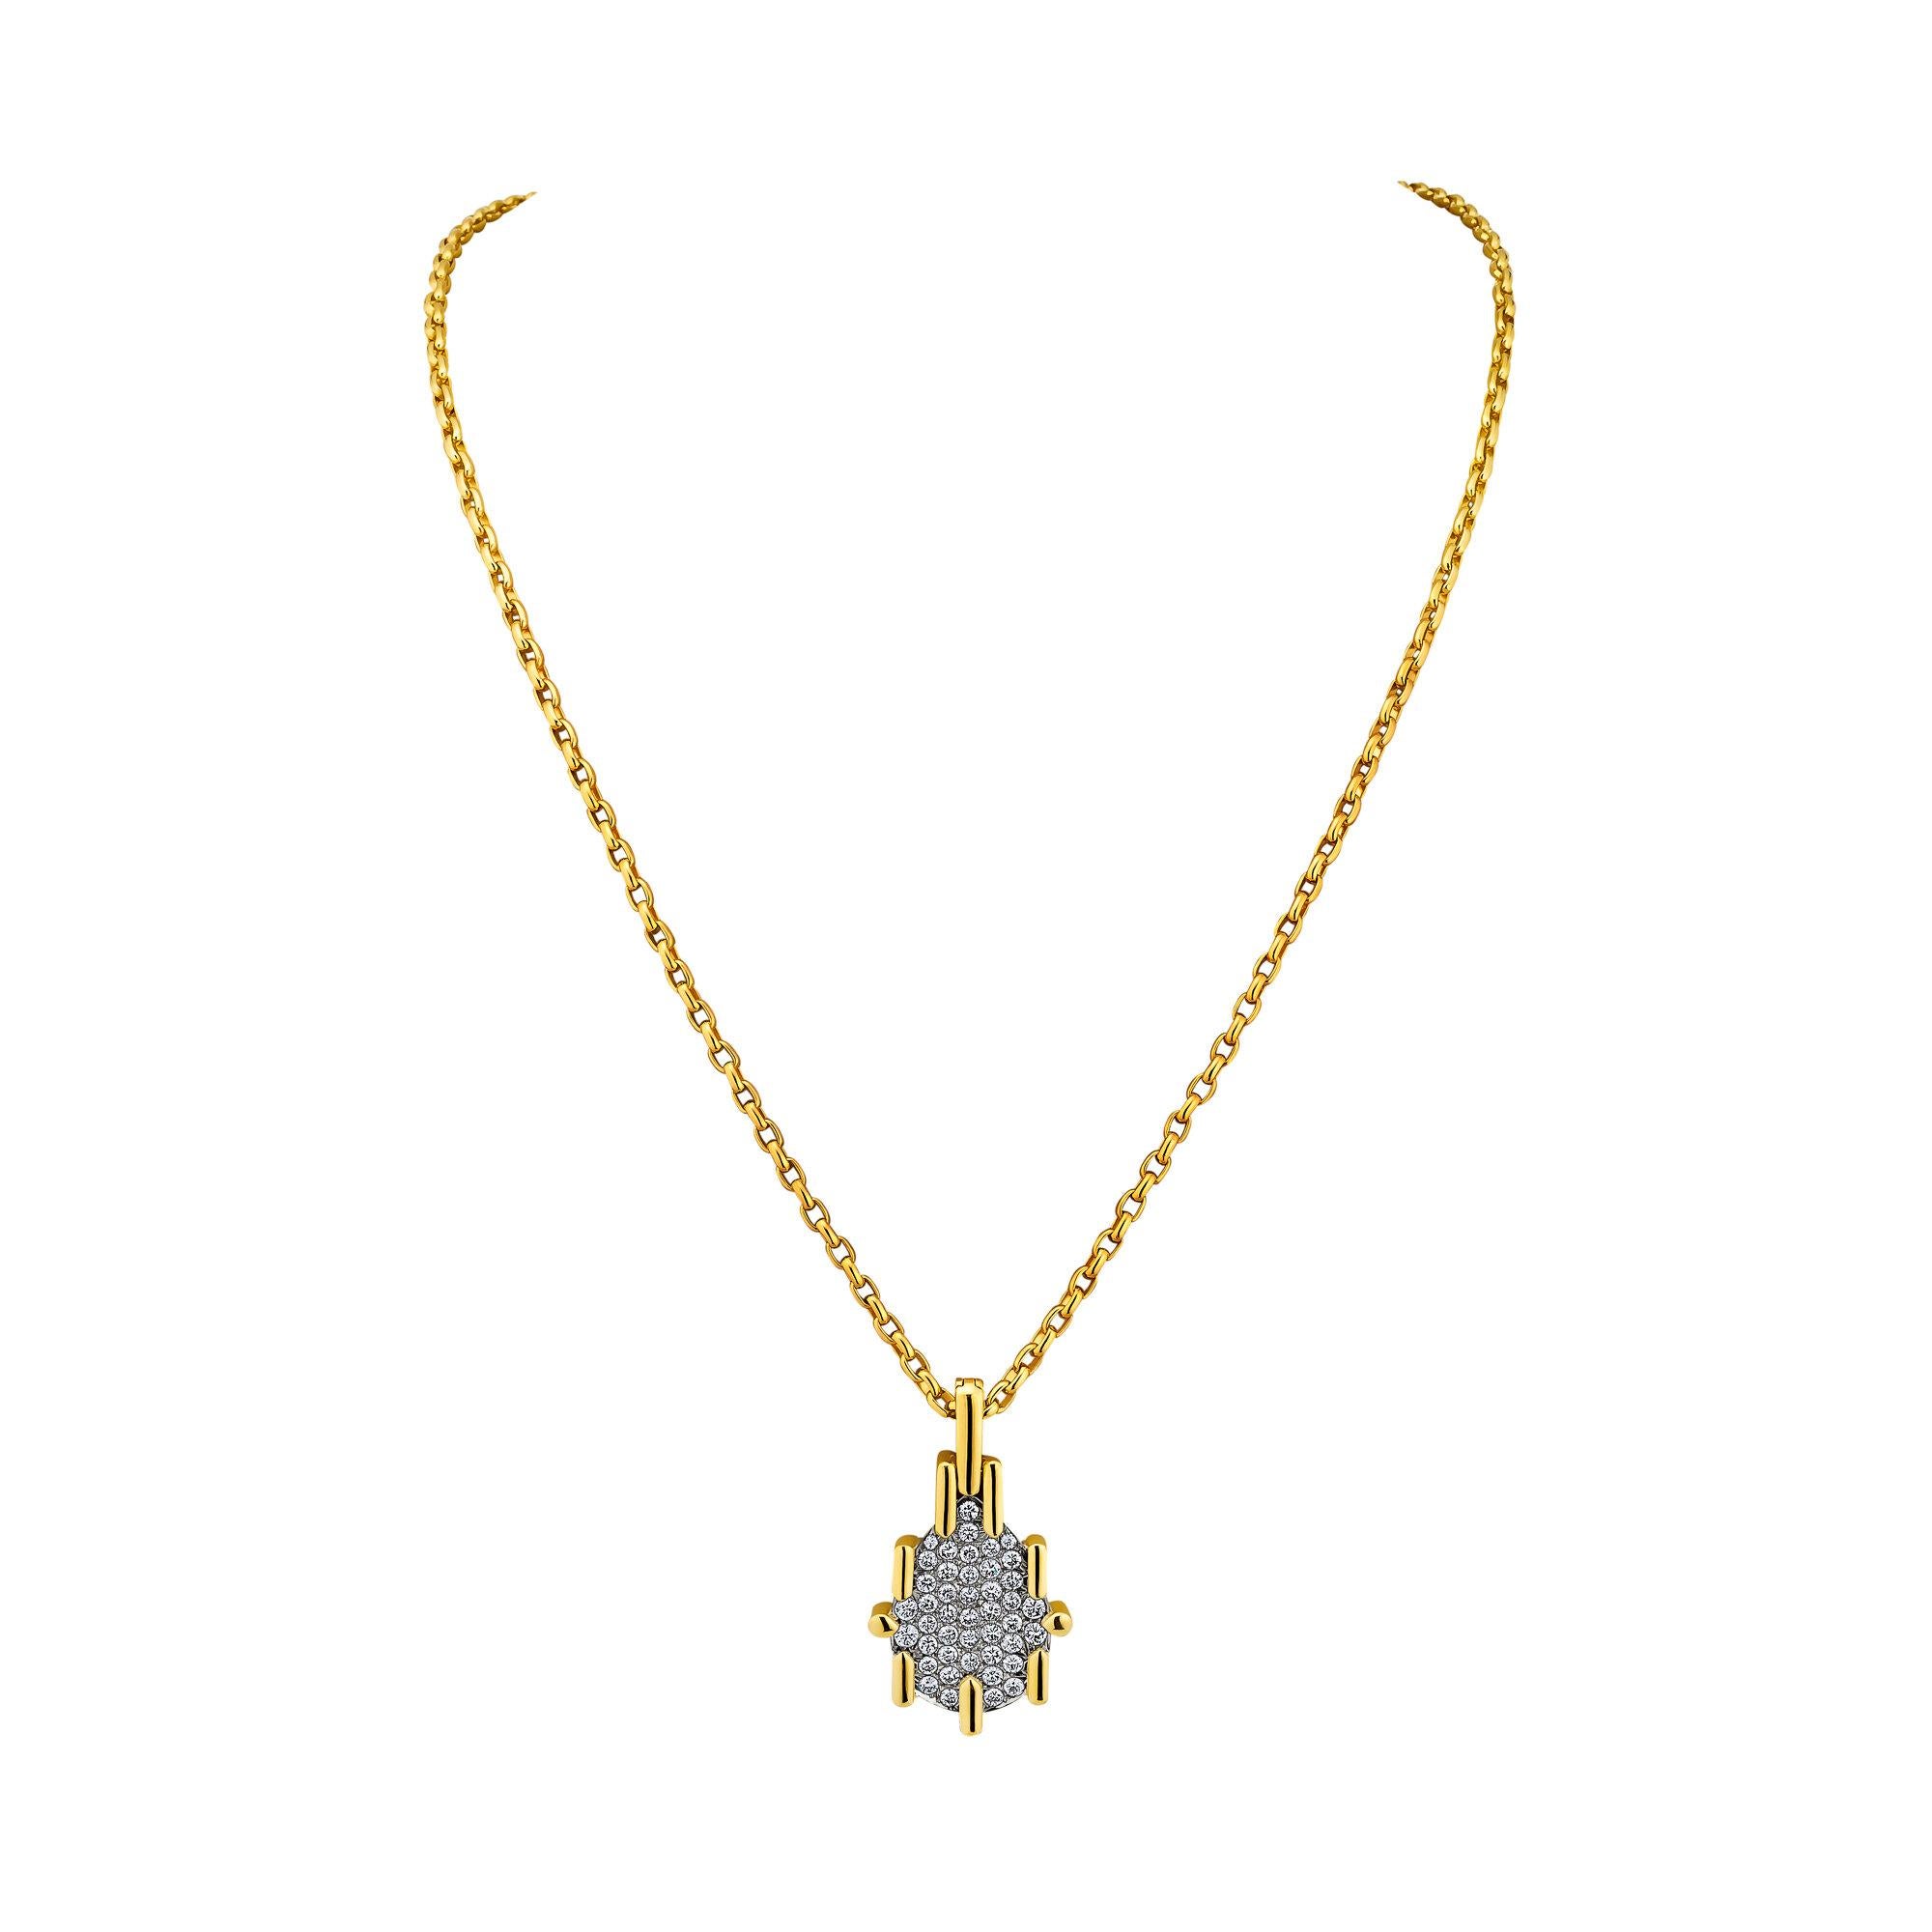 Let there be light!  And there always will be with this fiery diamond David Webb vintage pendant necklace.  With approximately 2.10 carats of round cut ultra bright white diamonds mounted in platinum and 18 karat yellow gold, this statement pendant